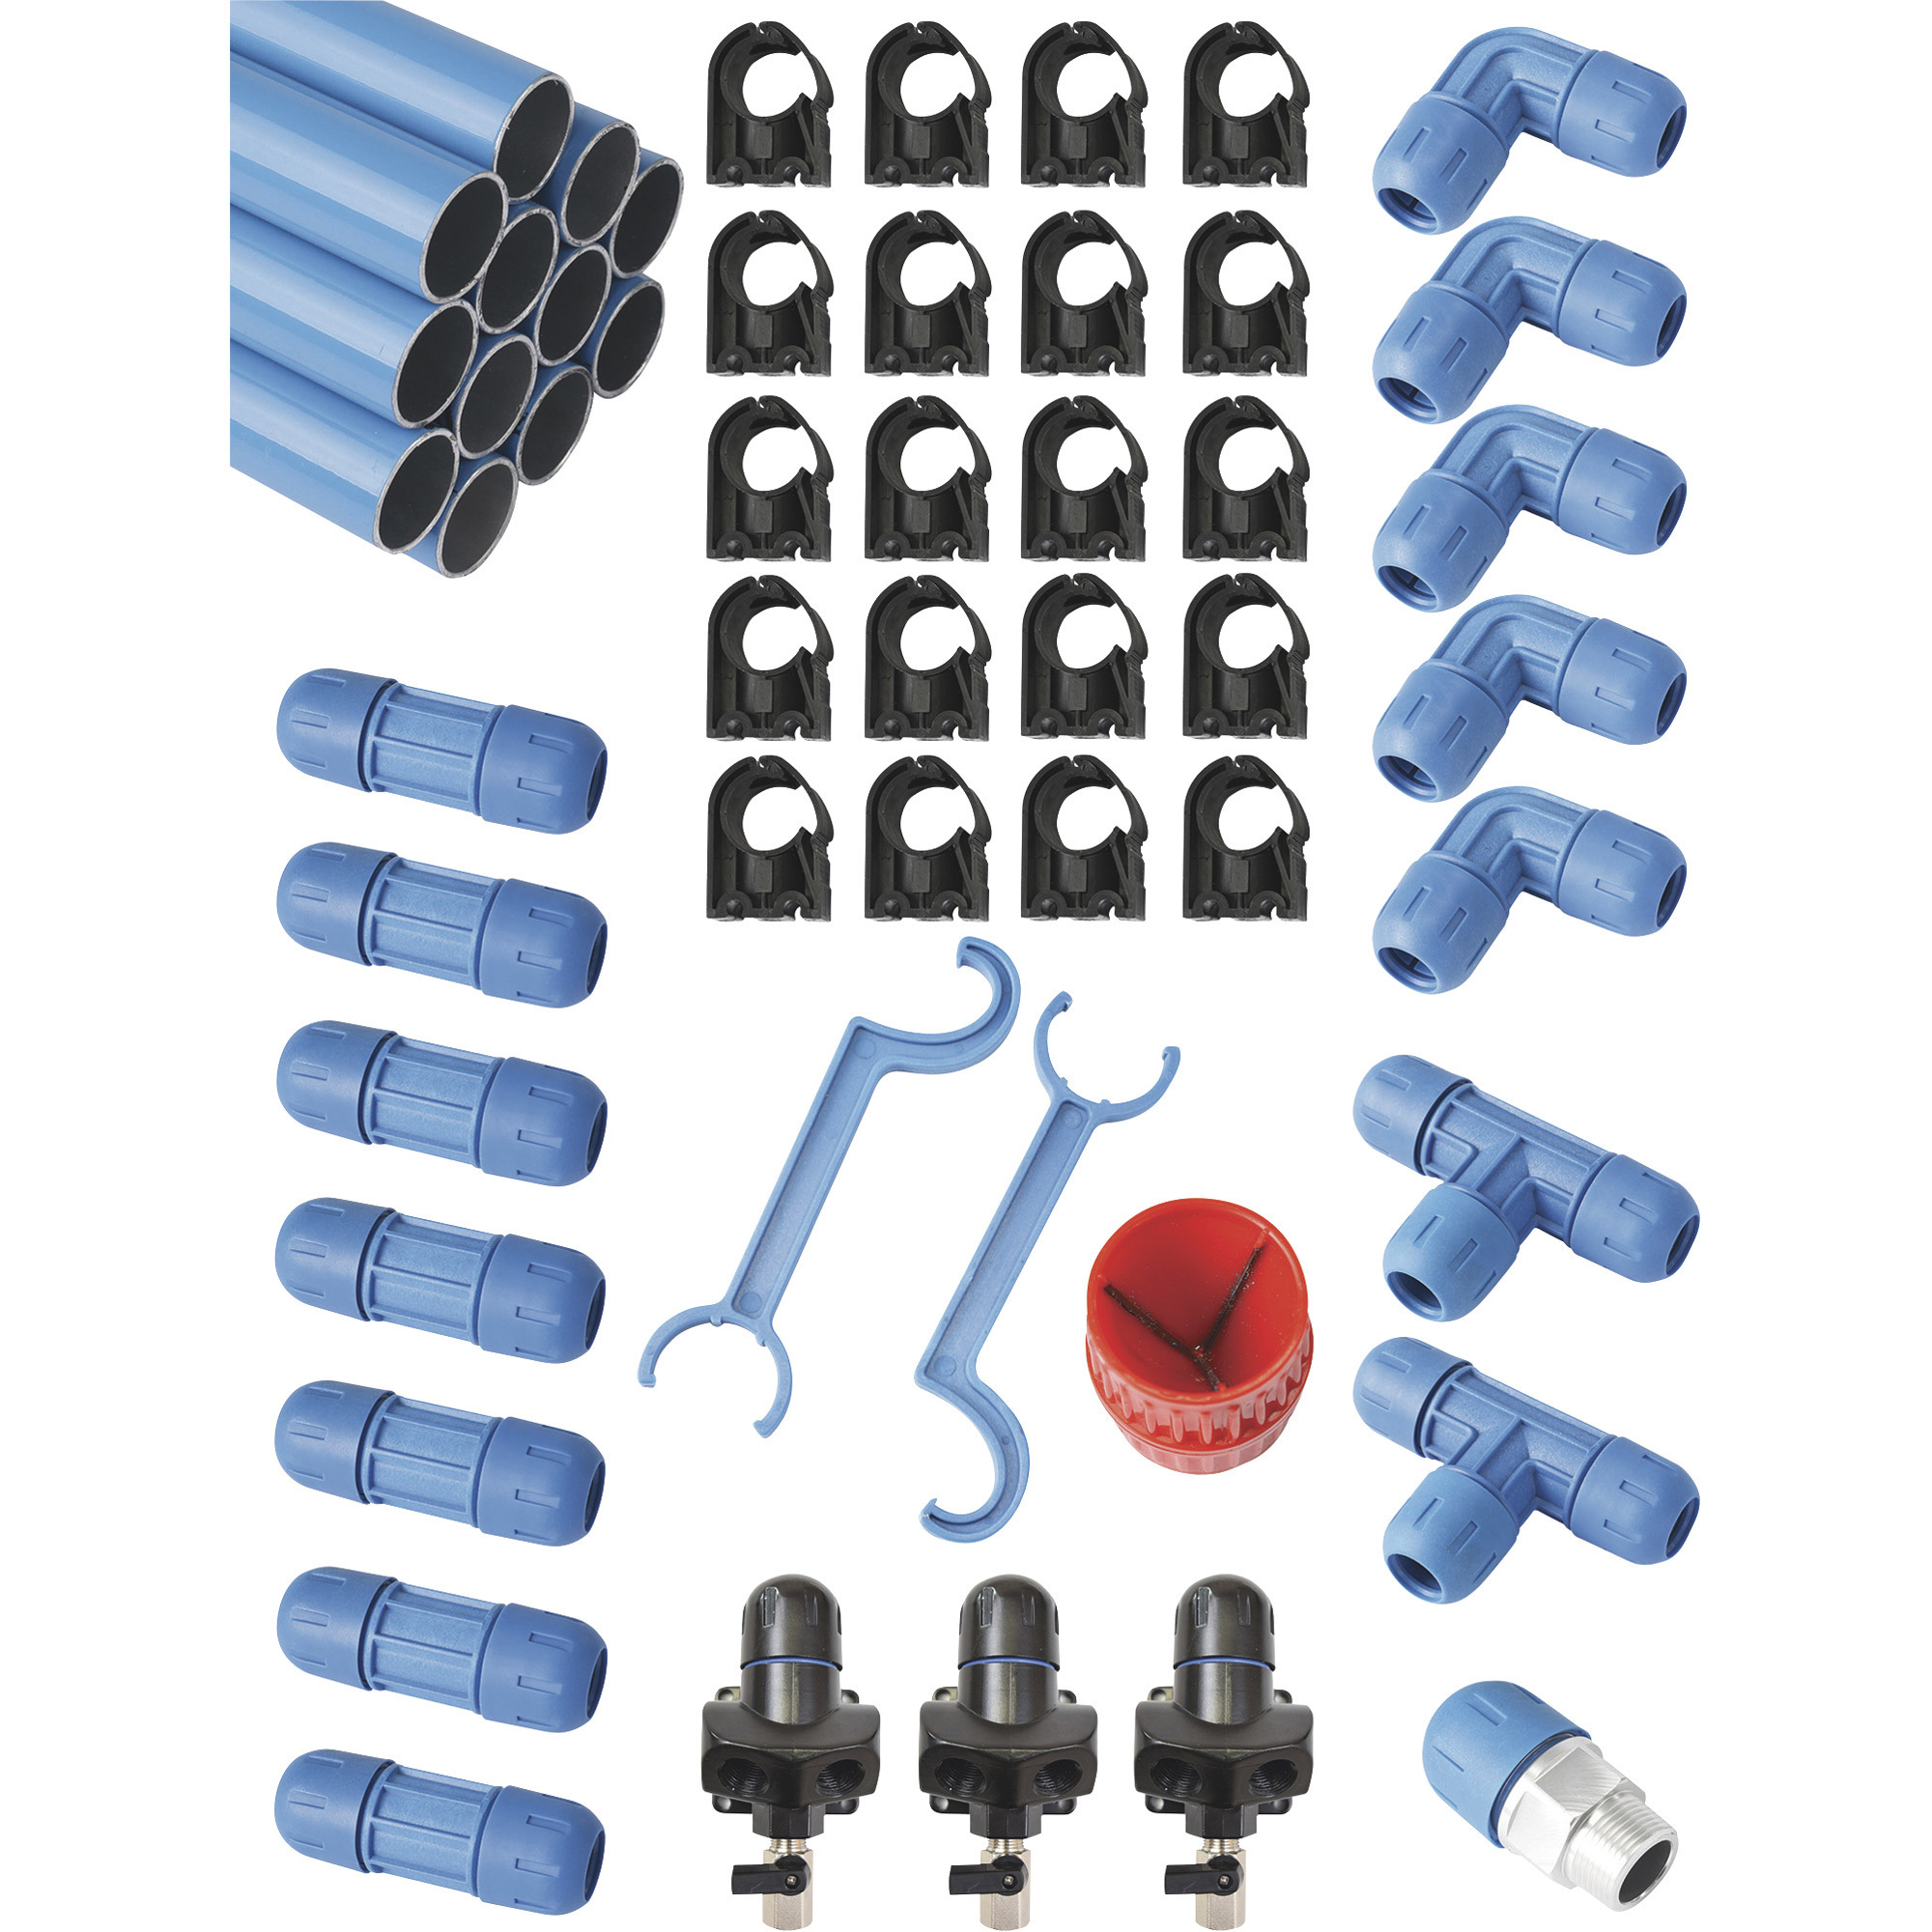 RapidAir 1Inch FastPipe Master Kit Compressed Air System, 90ft., Model F28090